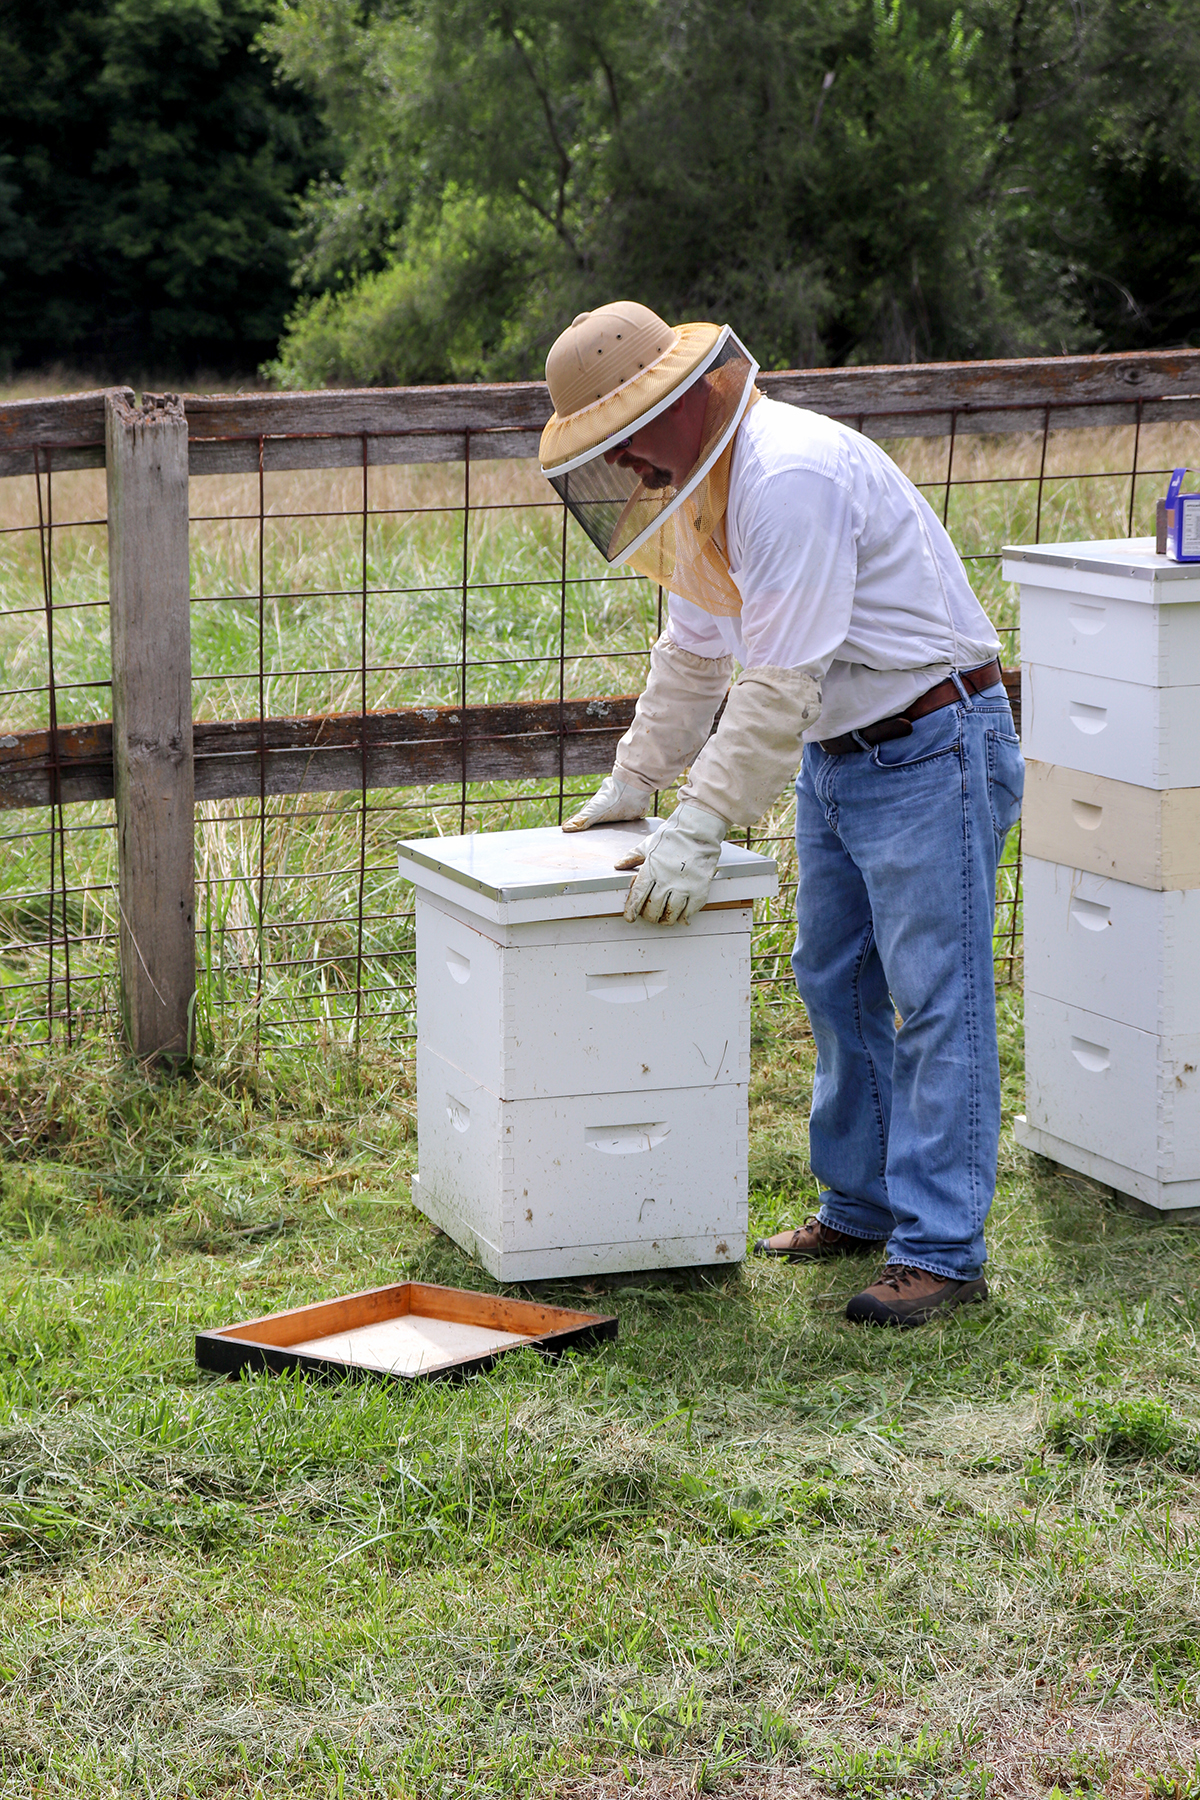 MU Extension agronomist and beekeeper Travis Harper teaches veterans and their families how to do beekeeping. MU’s Heroes to Hives program is the first state chapter modeled after a program offered through Michigan State University and partners. Photo by 